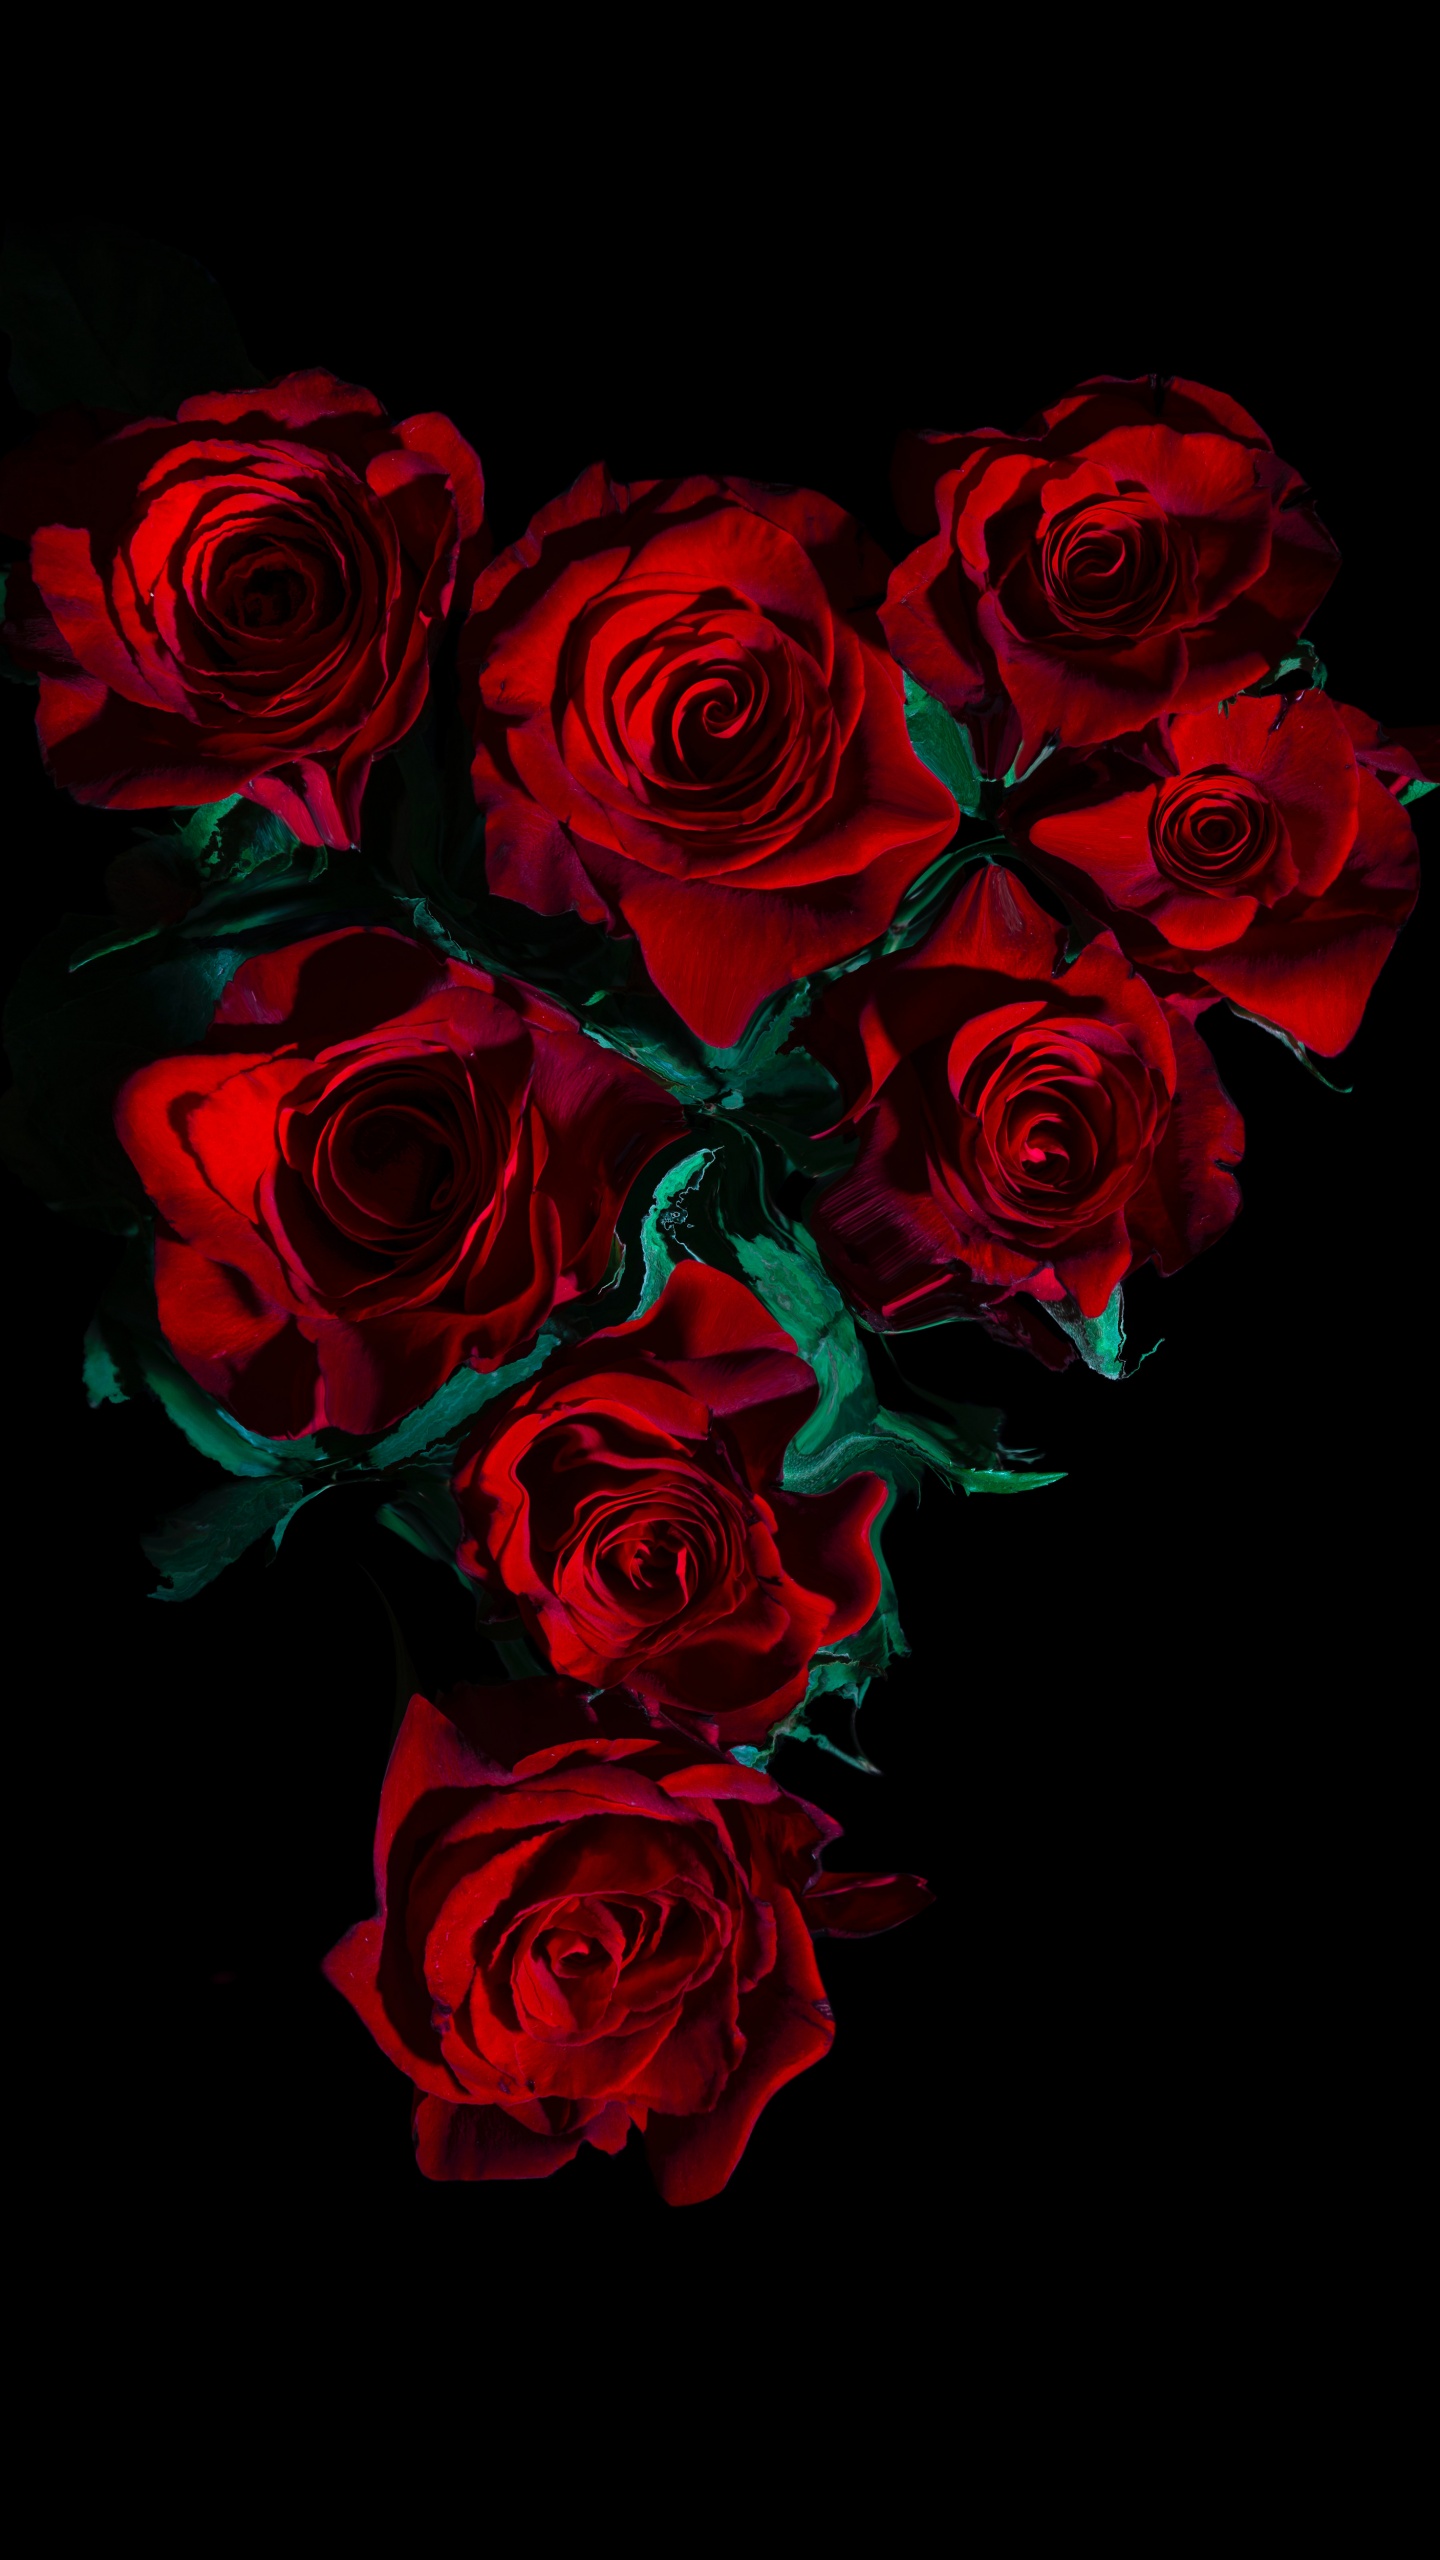 black and red rose wallpaper hd